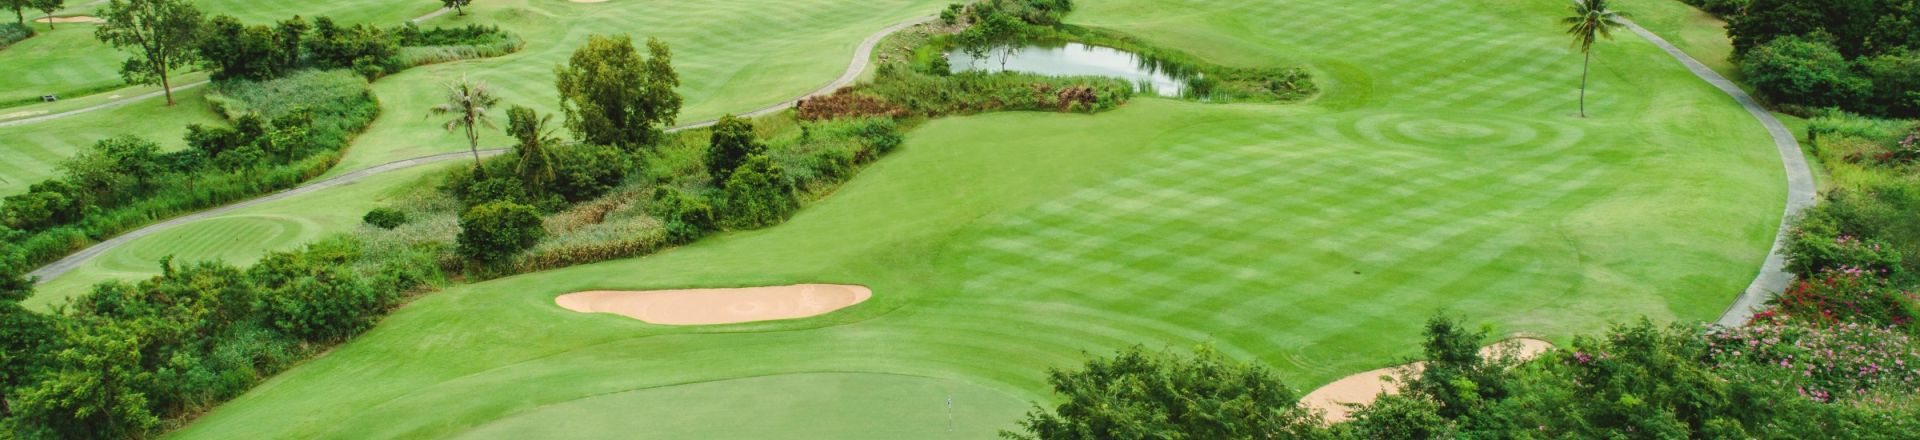 Play golf in Thailand at Pineapple Valley Golf Club Hua Hin